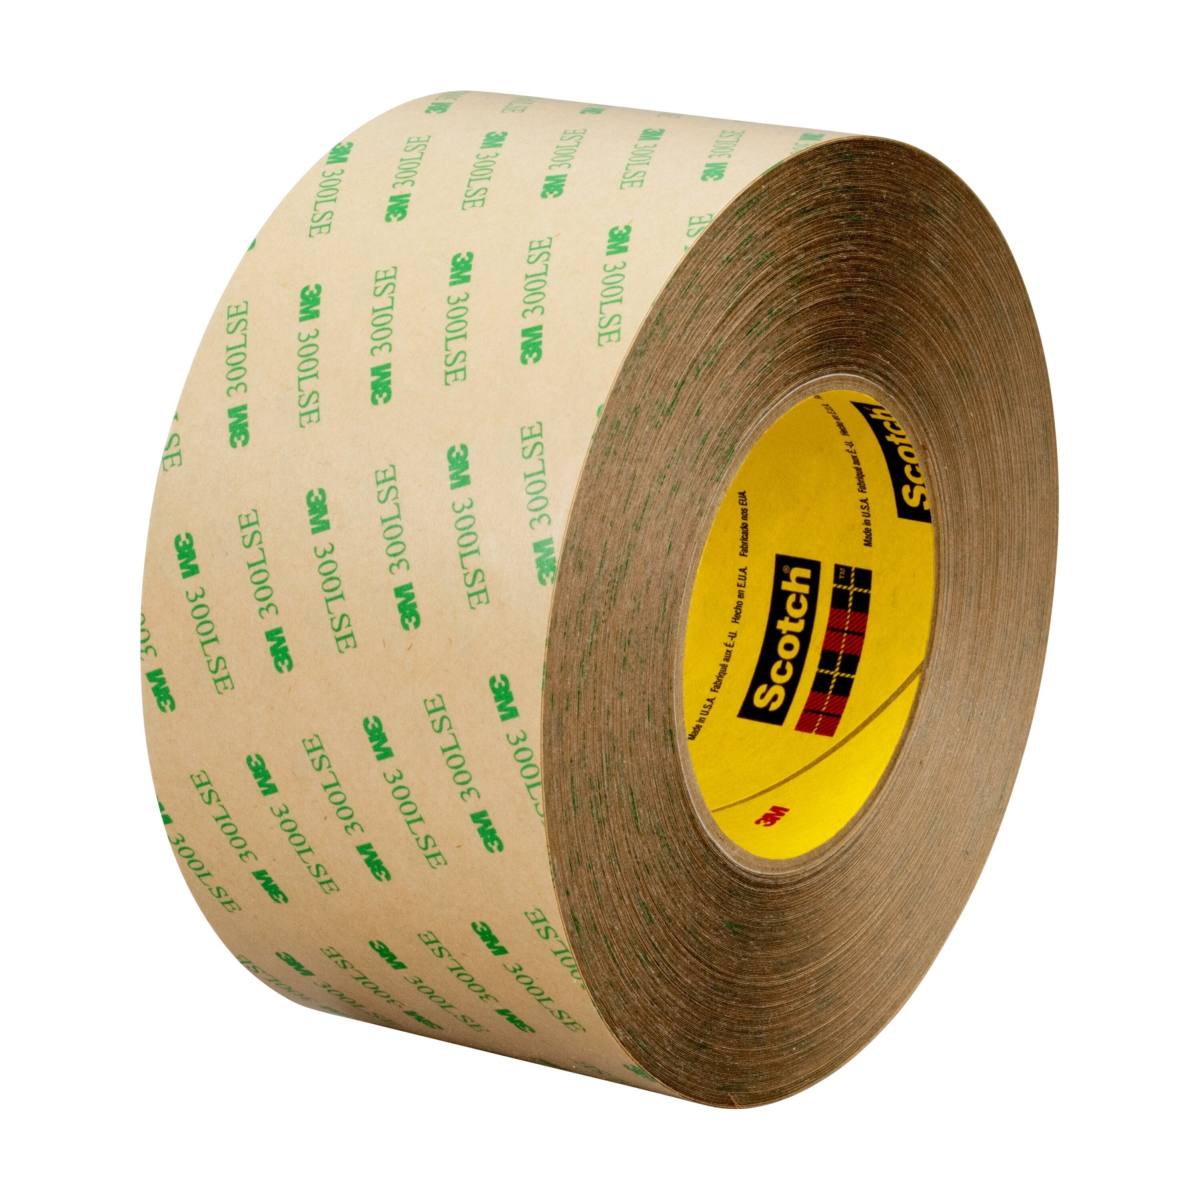 3M Dubbelzijdig plakband met polyester drager 93020LE, transparant, 25 mm x 55 m, 0,20 mm